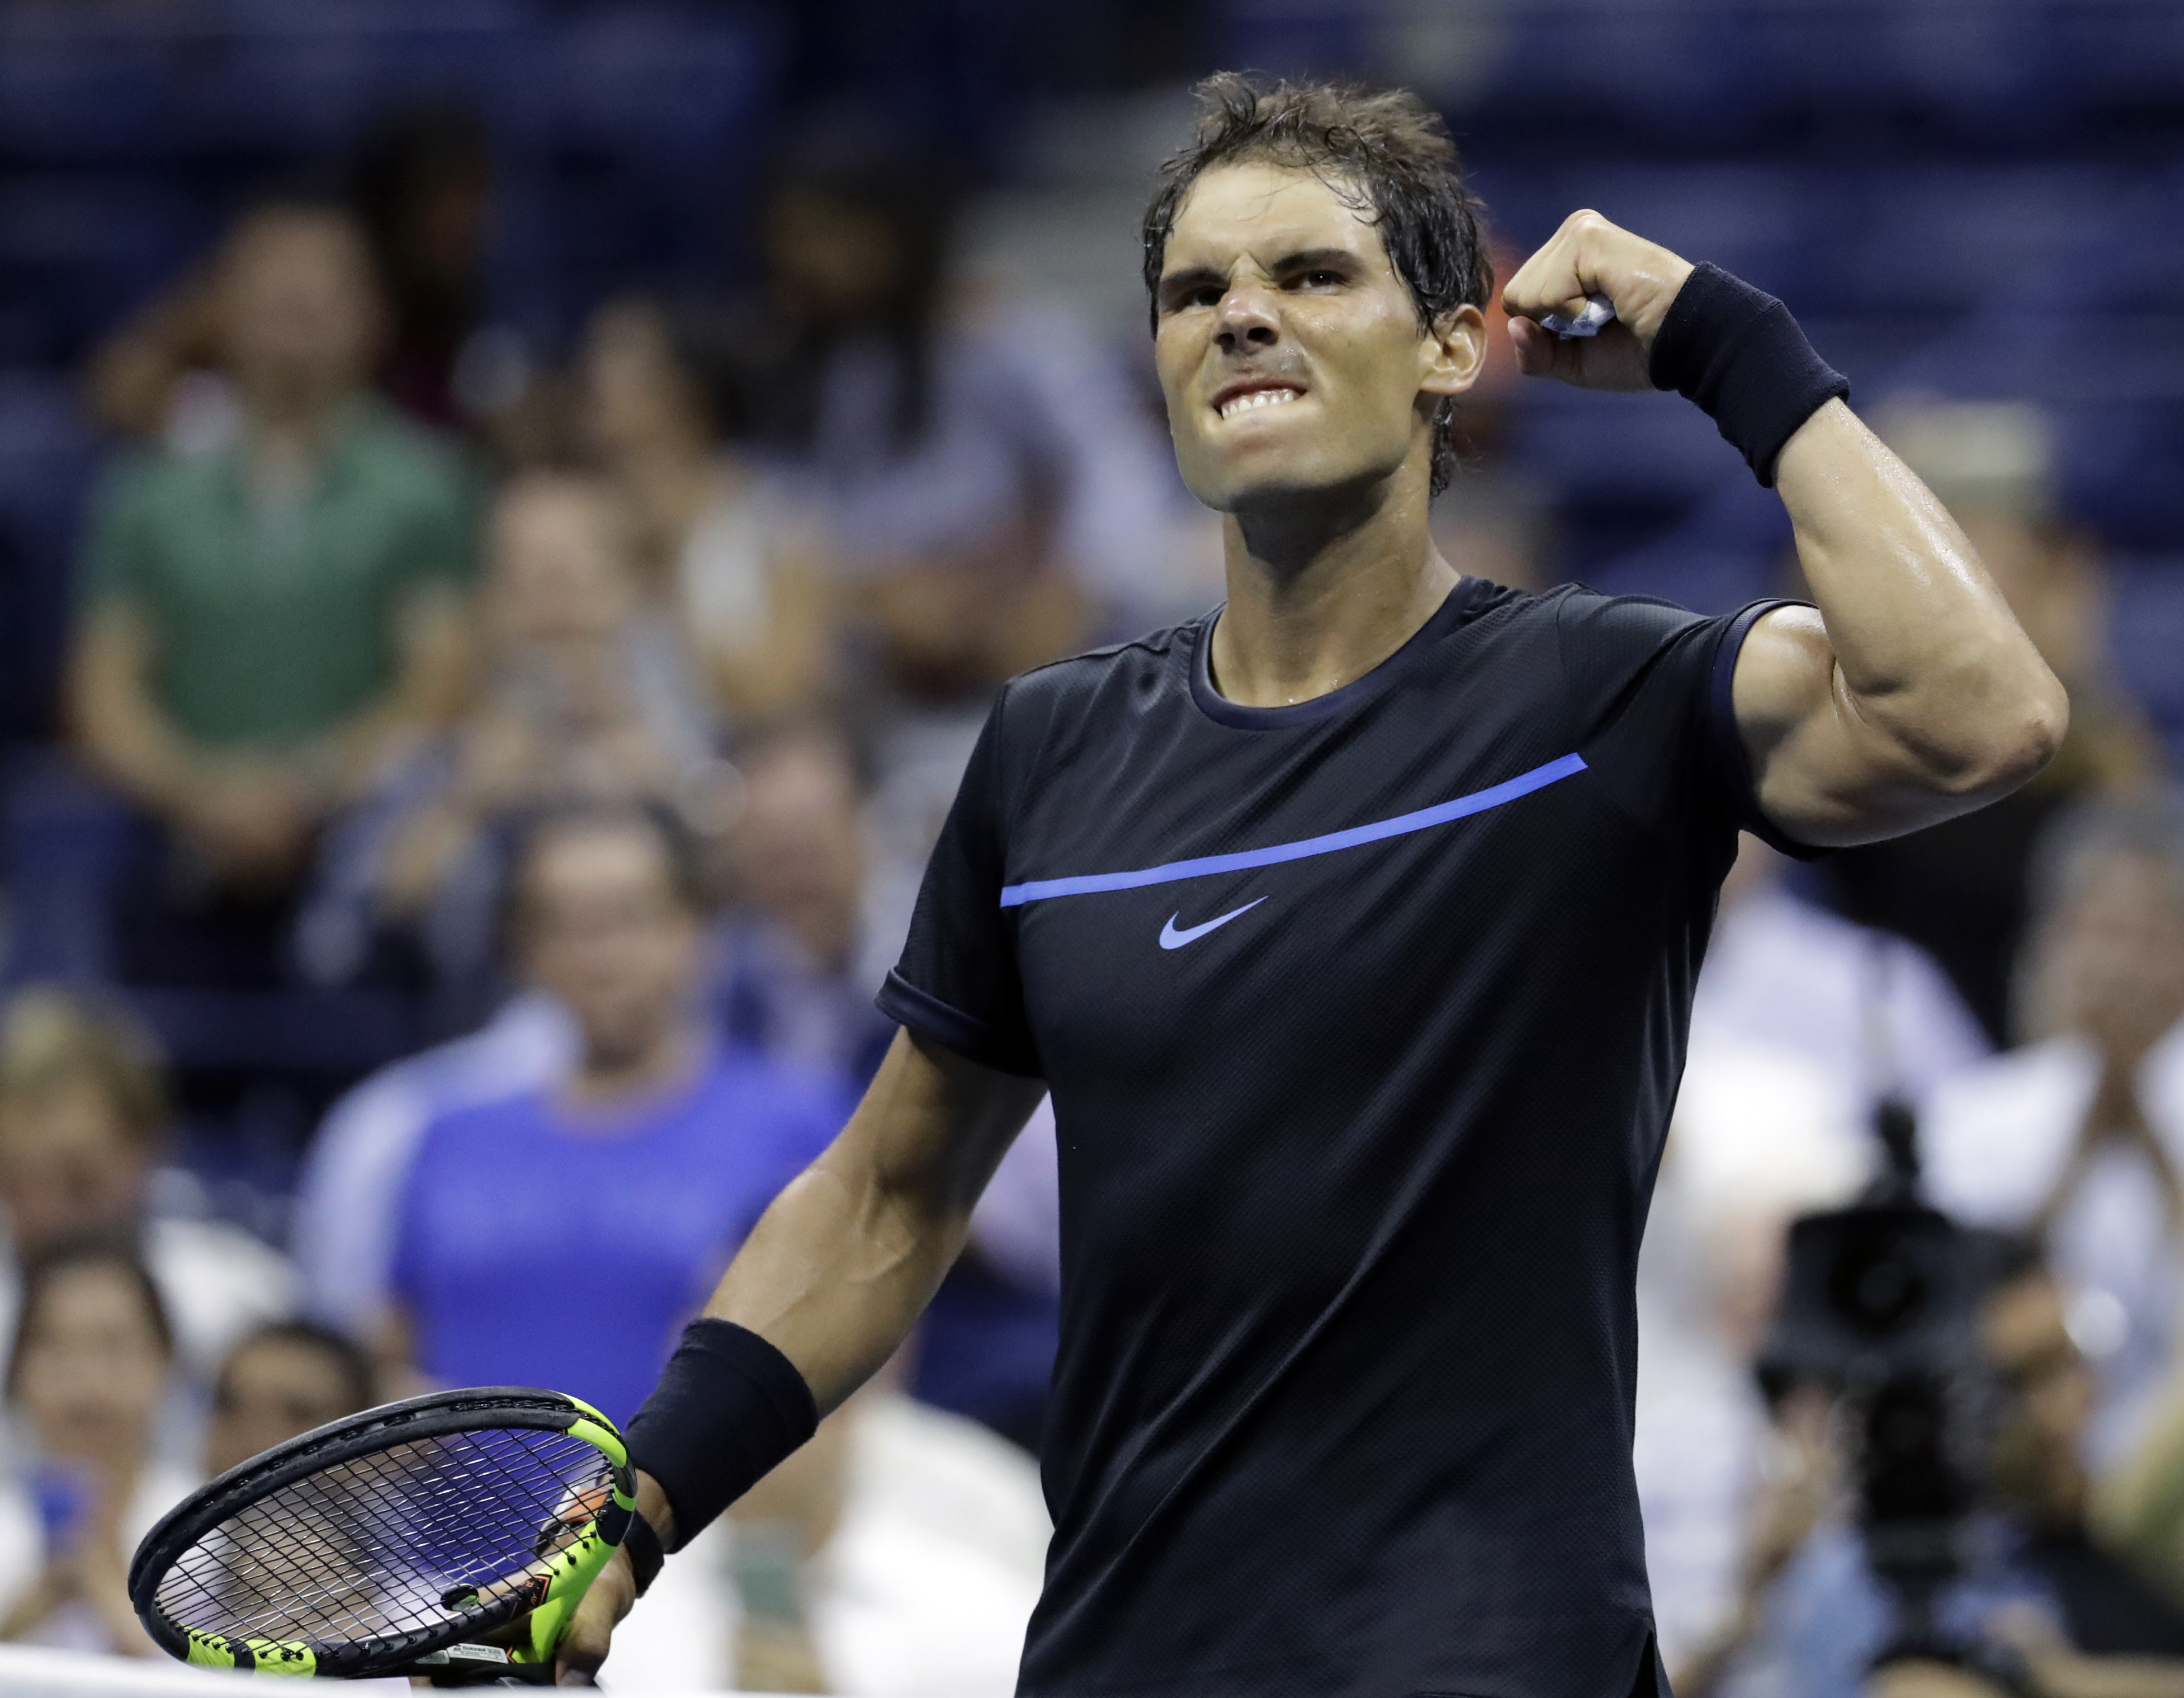 Under closed roof for first time, Rafael Nadal rolls at U.S. Open